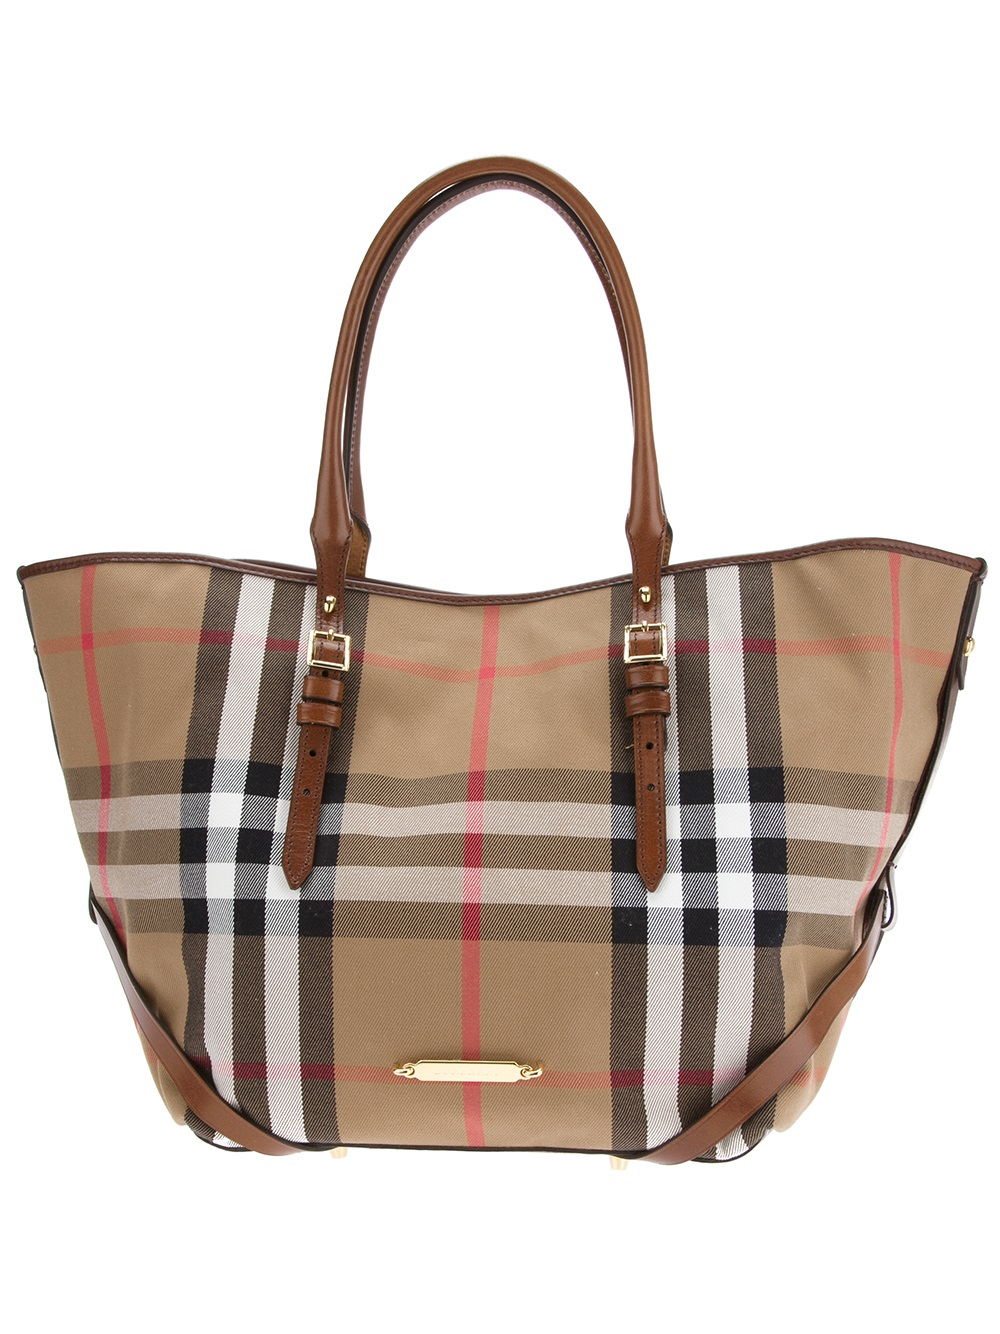 Burberry Medium Bridle House Tote Bag in Brown - Lyst